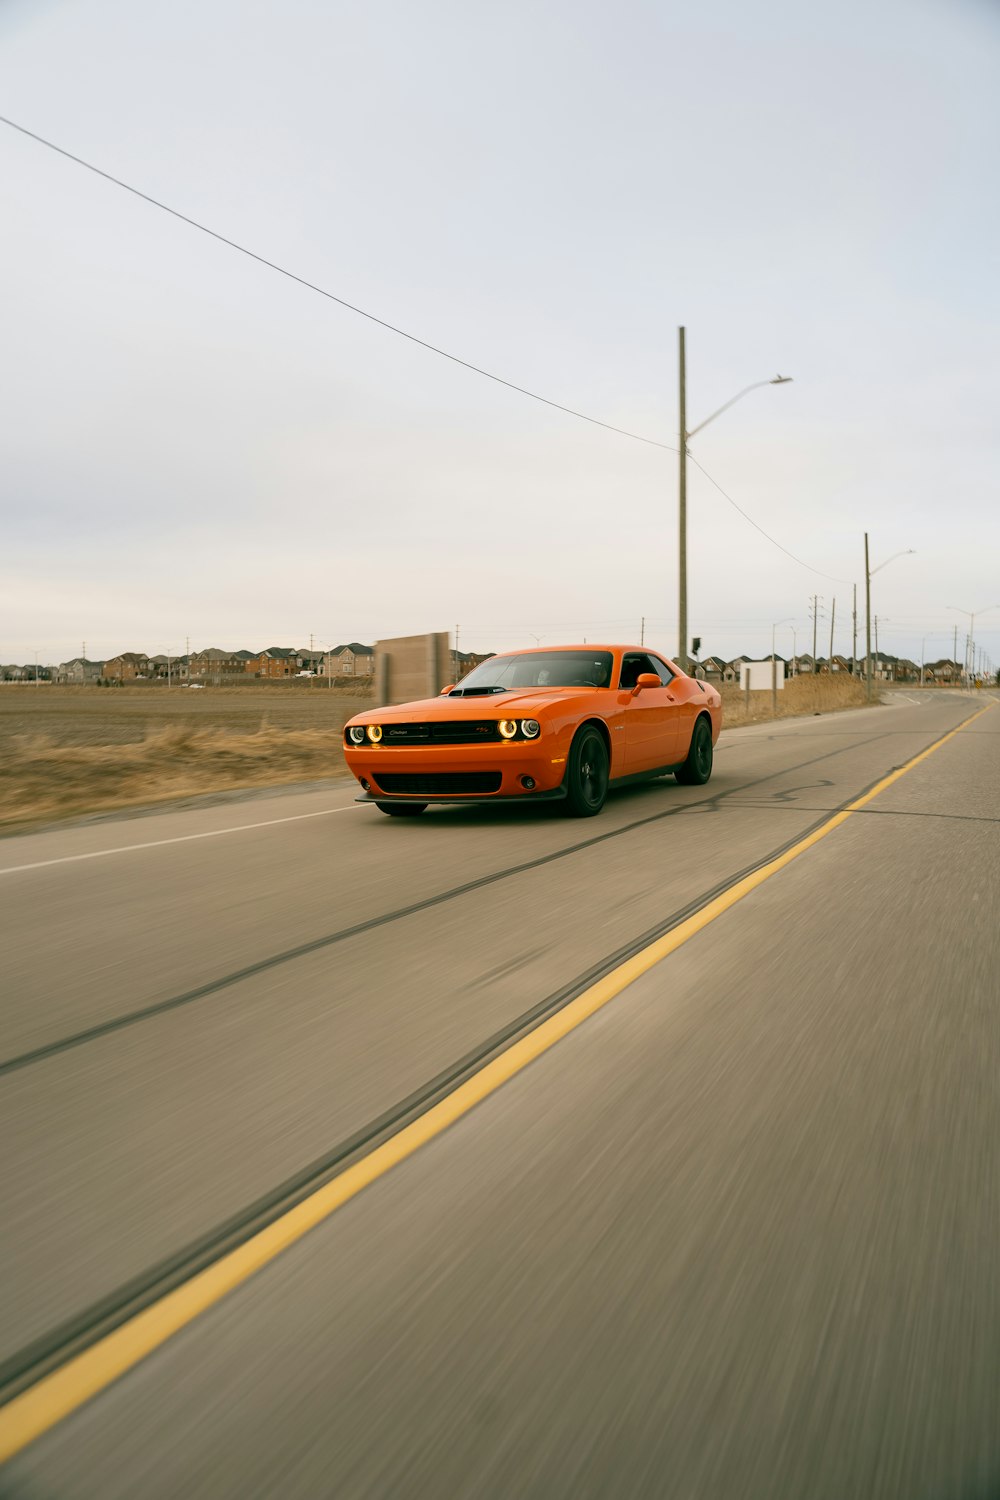 an orange sports car driving on a road